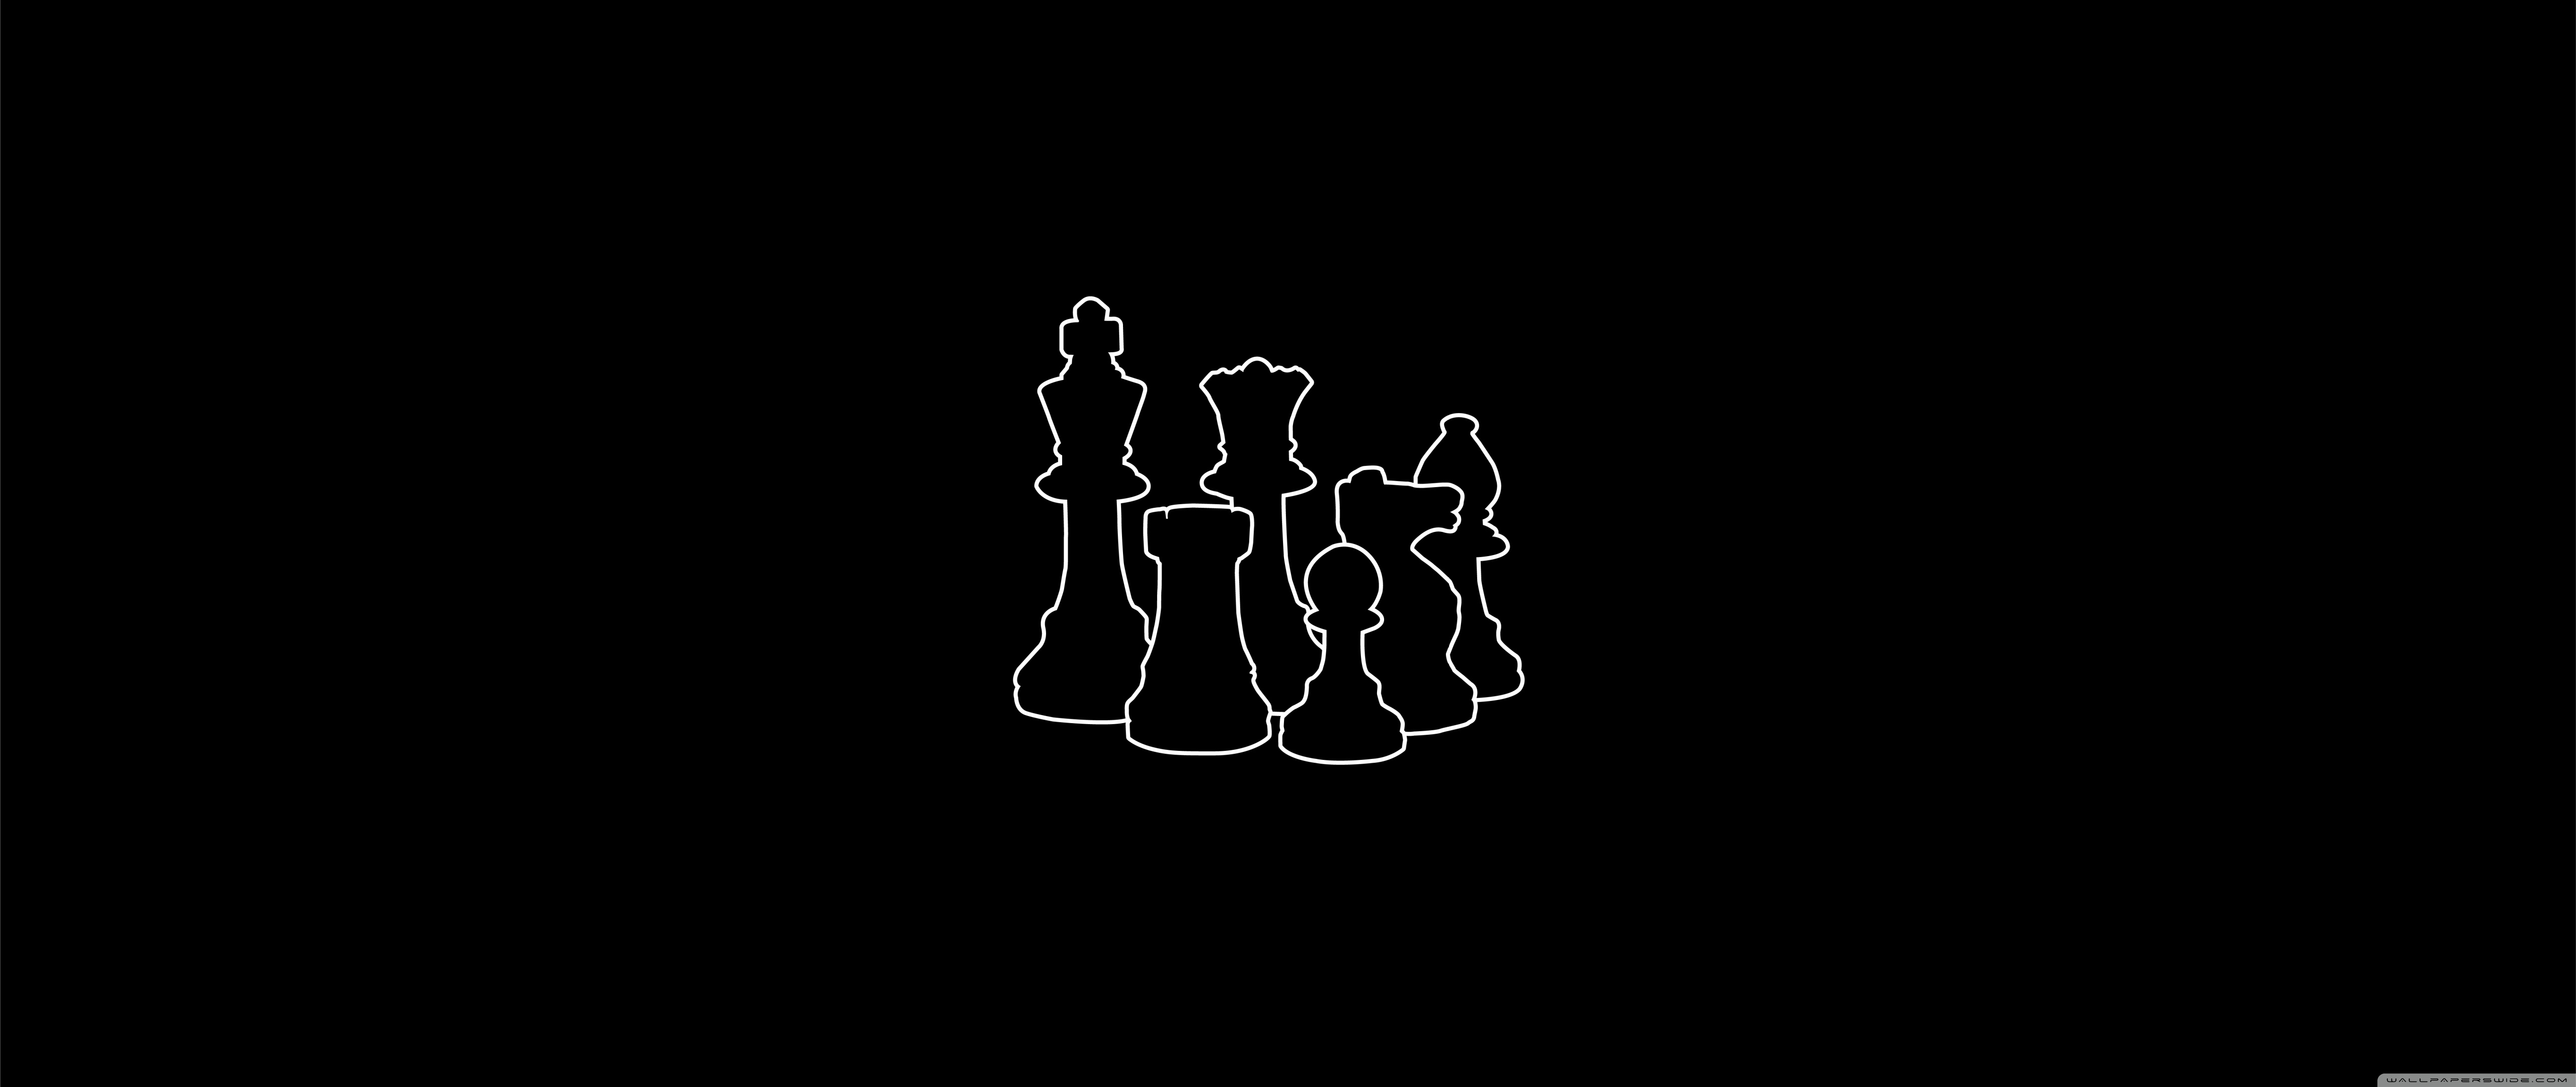 remake of the windows 3.1 chess wallpaper for ultrawide [3440x1440] :  r/WidescreenWallpaper